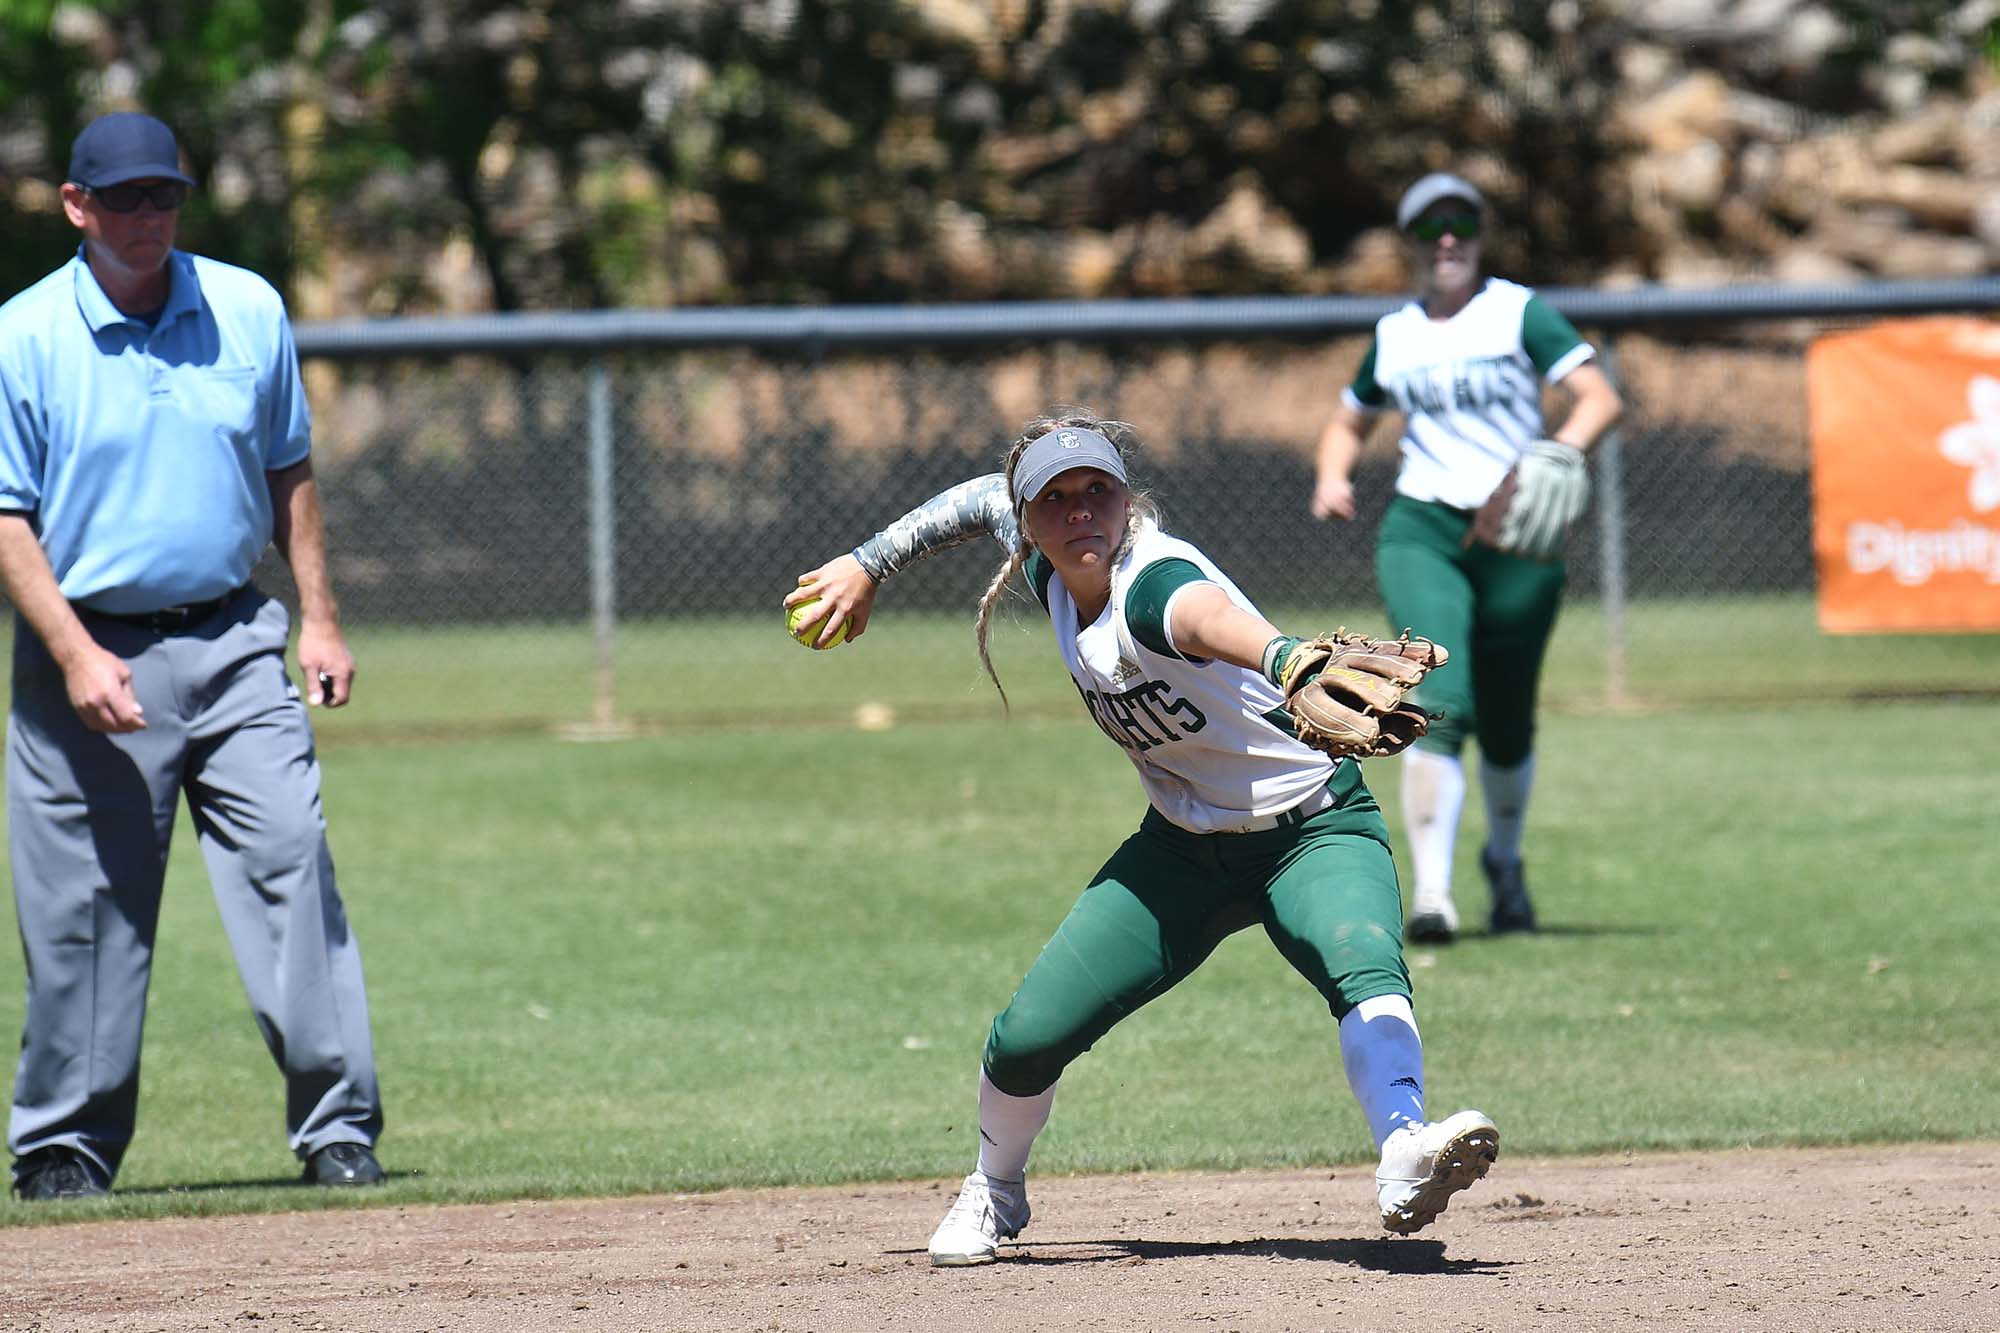 SHASTA LOSES DOUBLEHEADER TO BUTTE